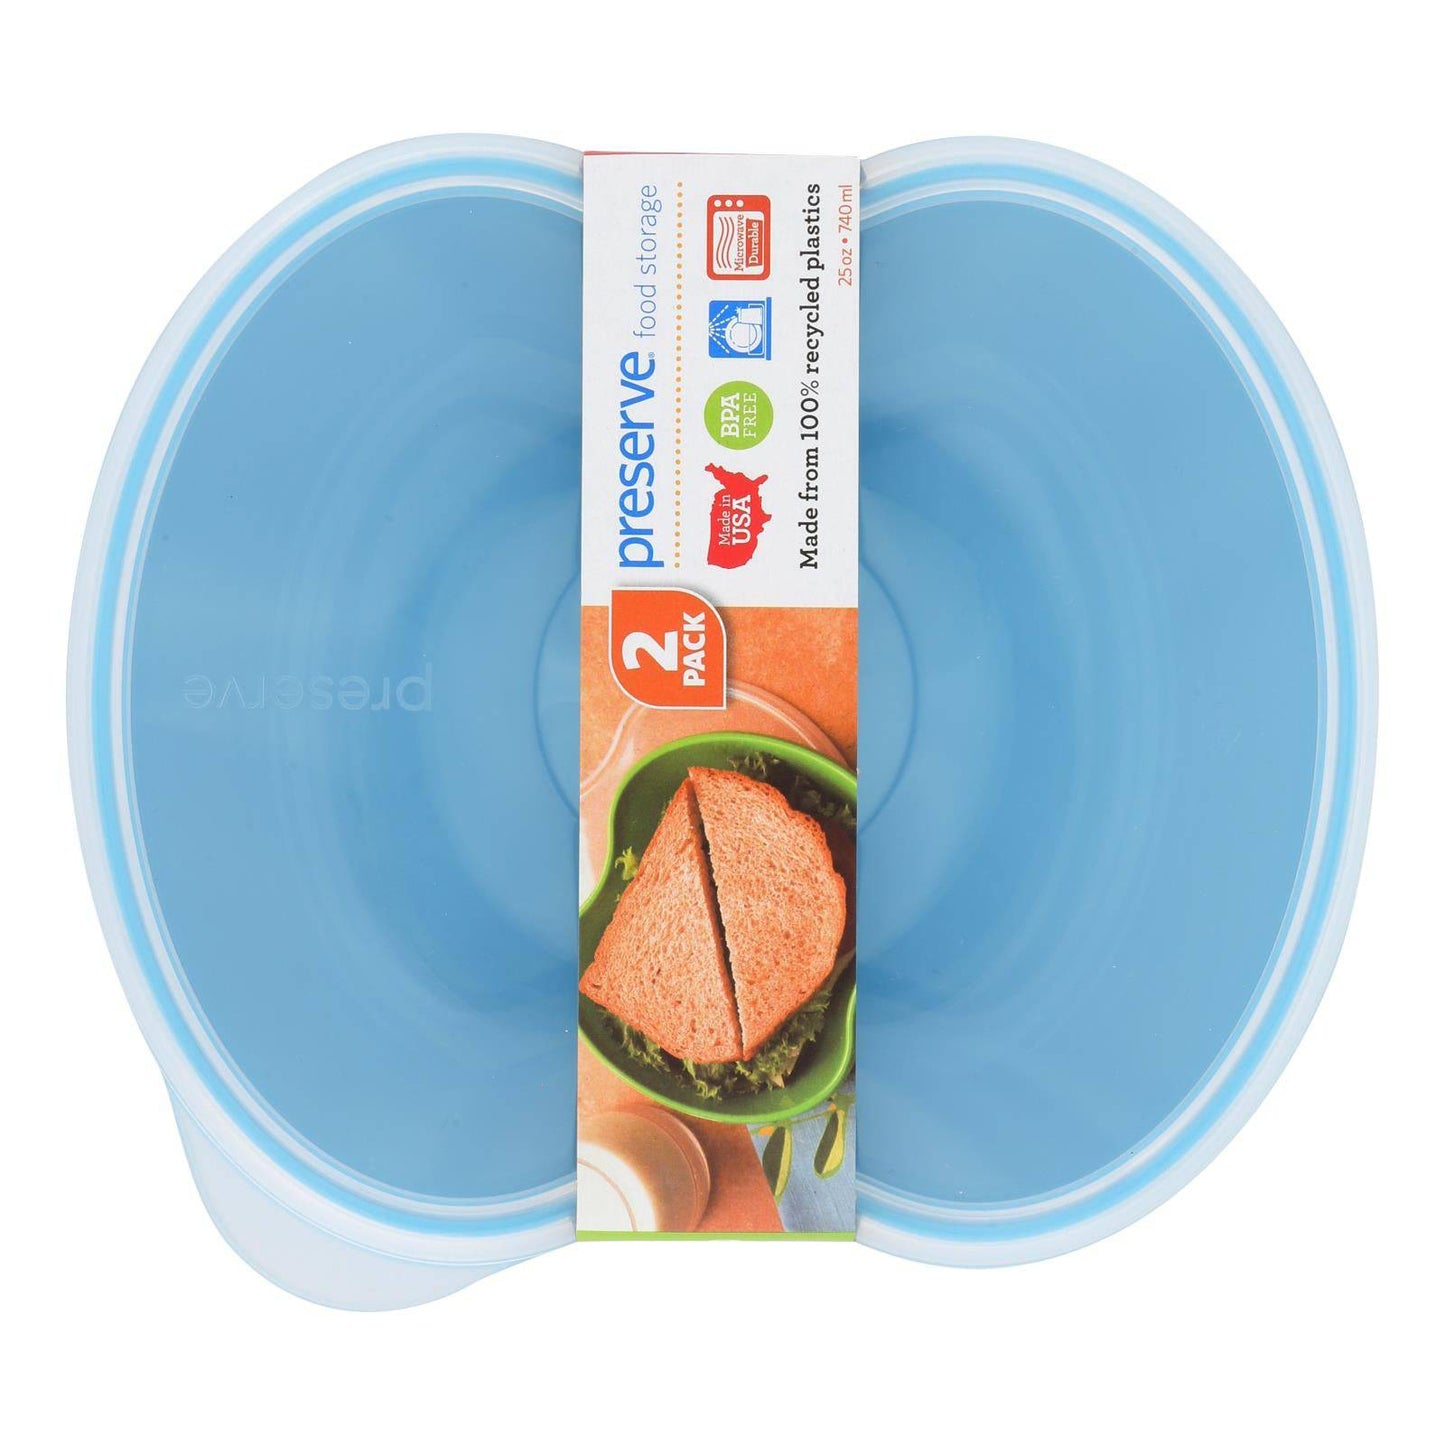 Preserve Small Square Food Storage Container - Aqua - 2 Pack | OnlyNaturals.us